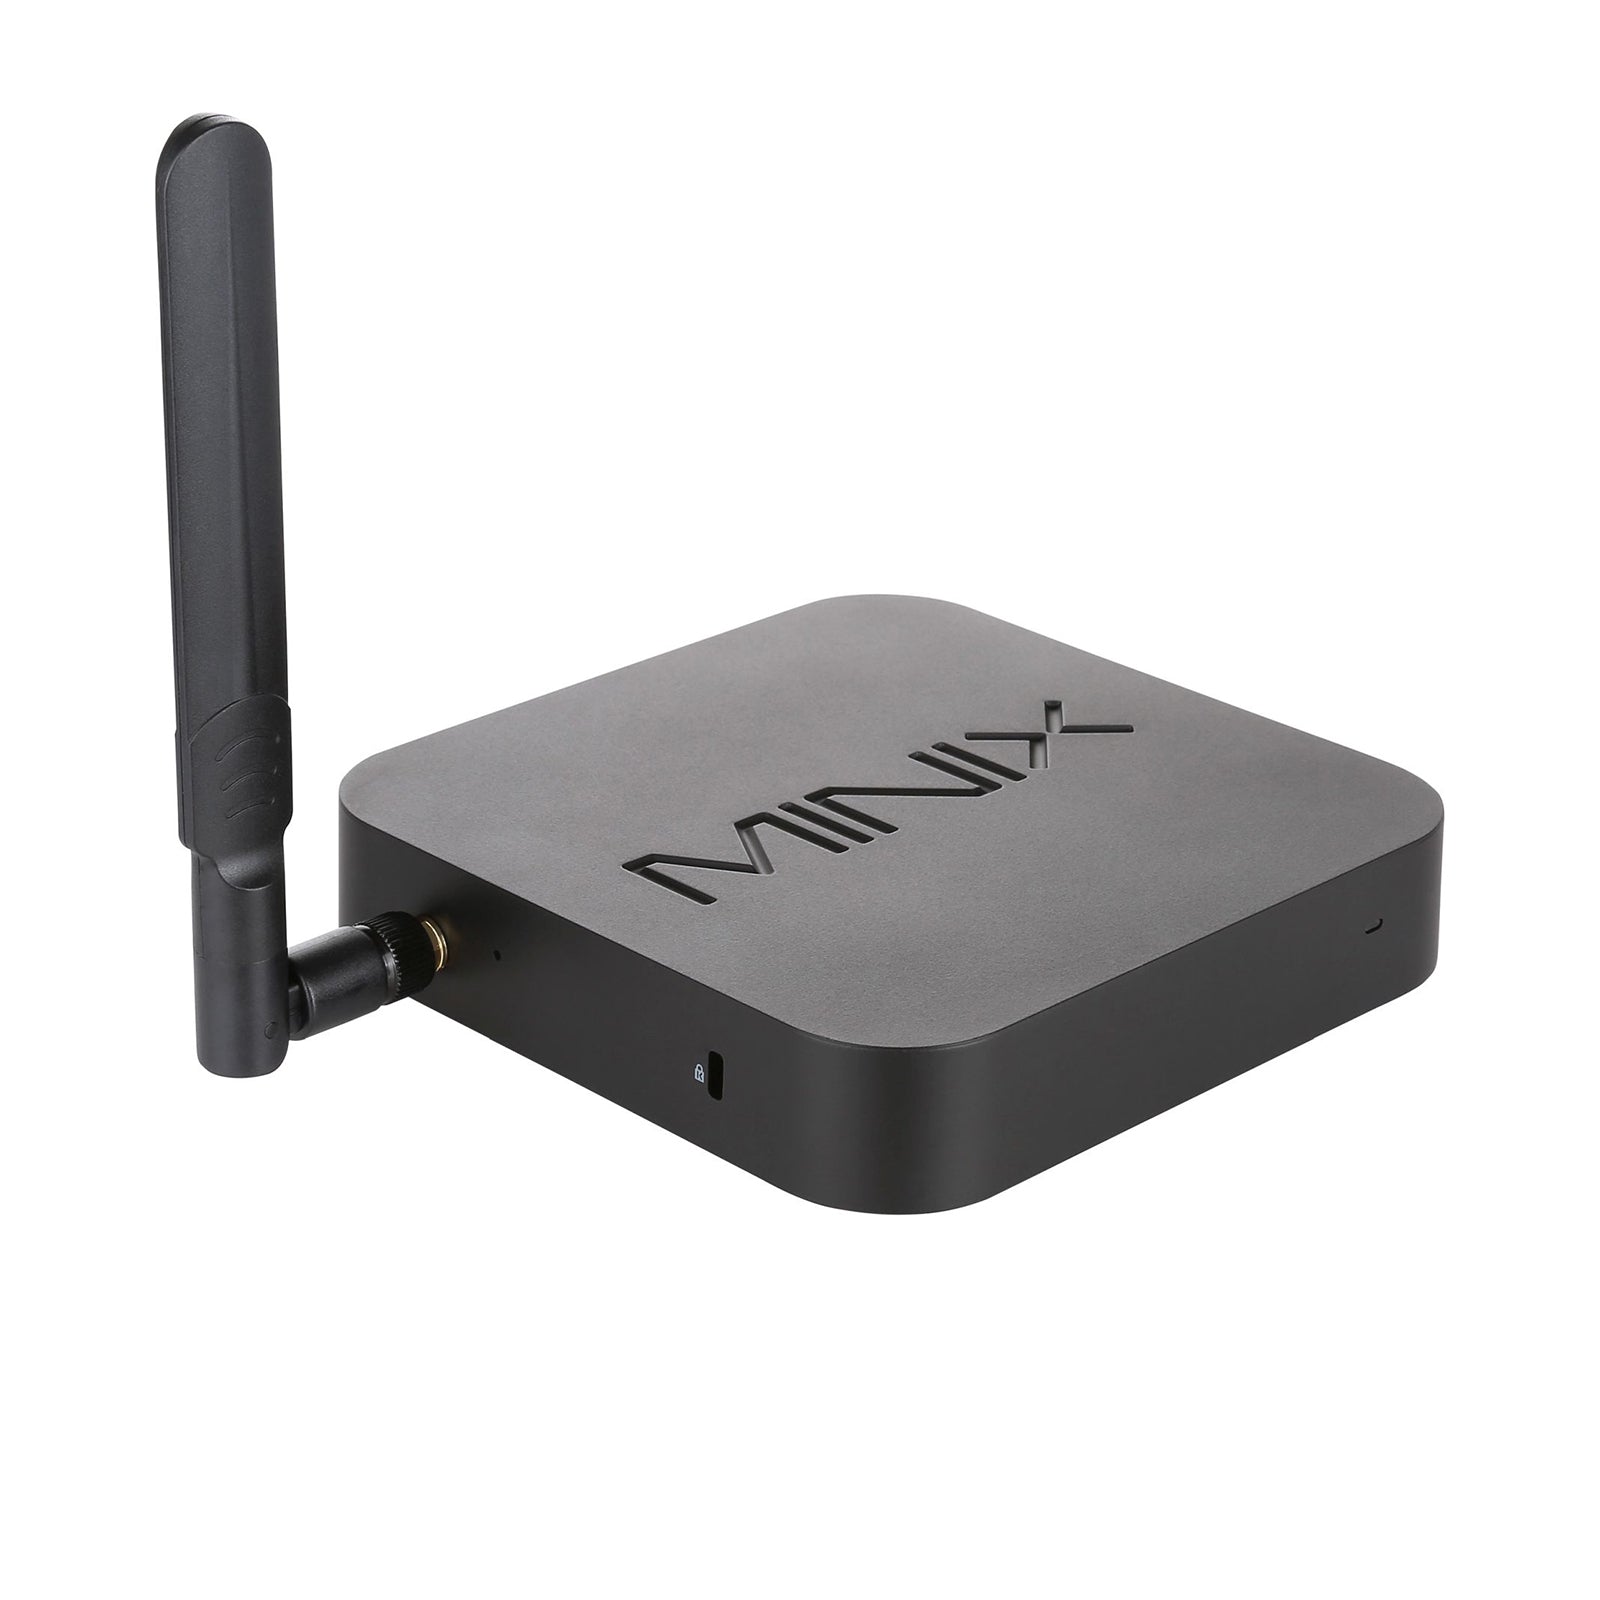 NEO Z83-4 Max [UK] – Minix Official Store